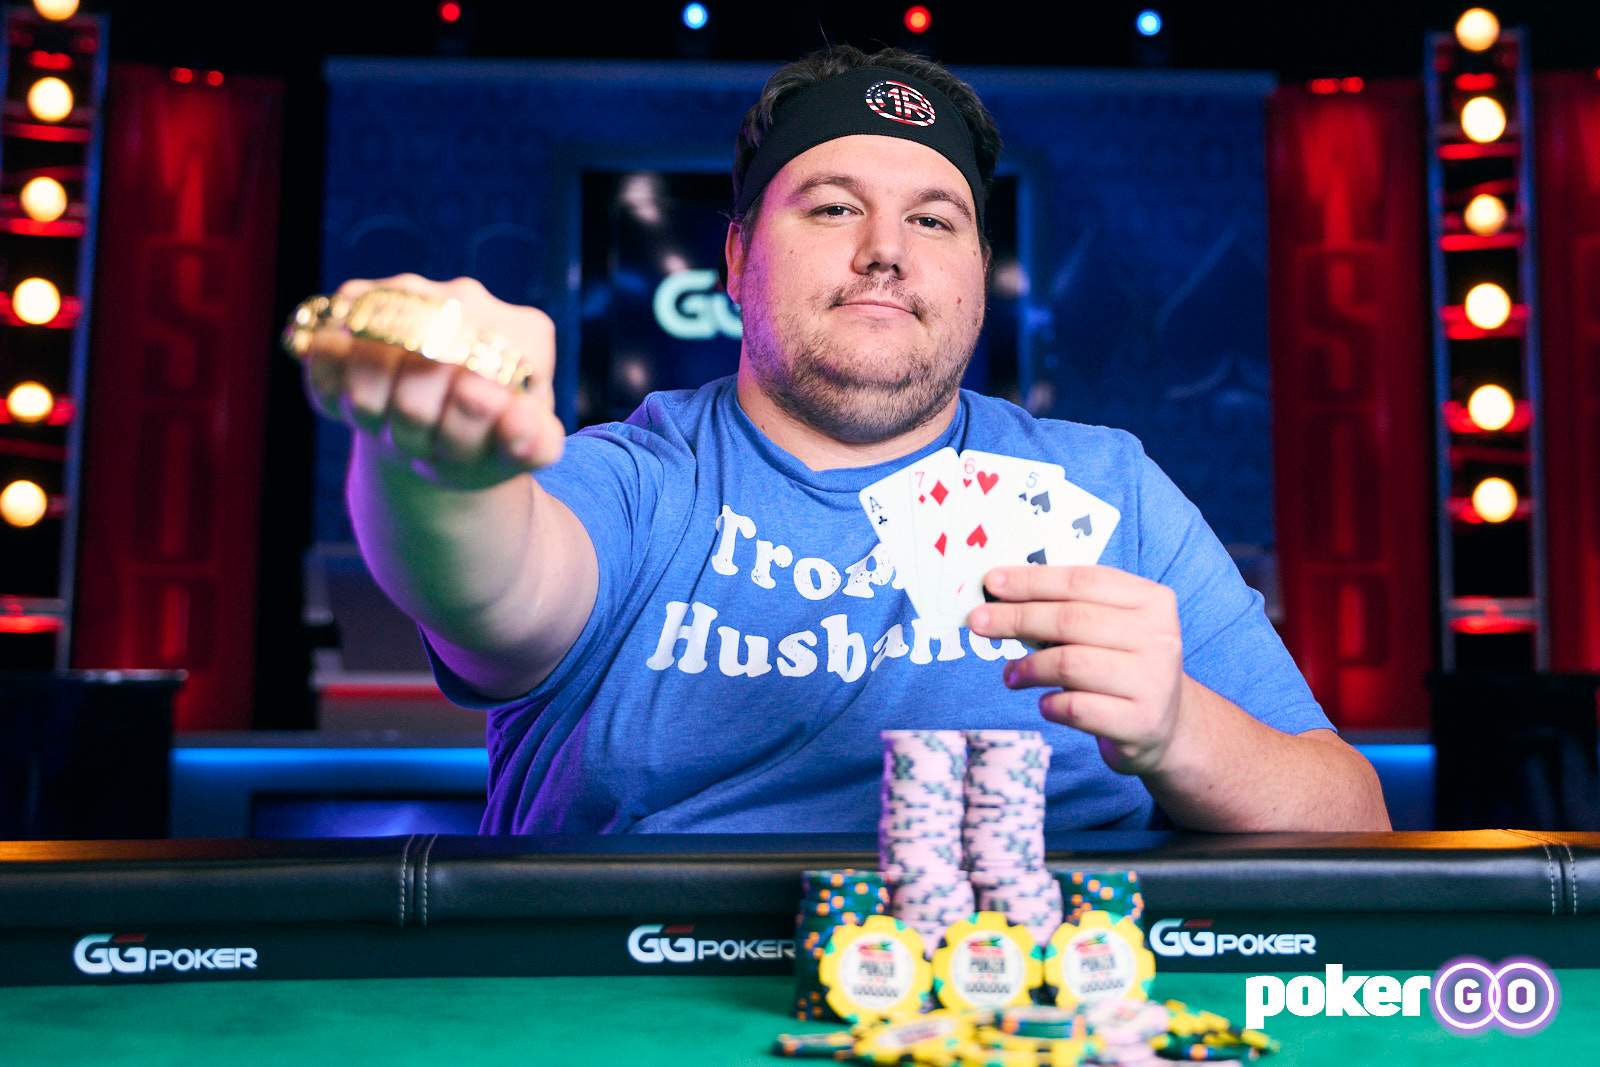 Shaun Deeb Wins WSOP $25,000 High Roller PLO for Second Time and Fifth Career Bracelet